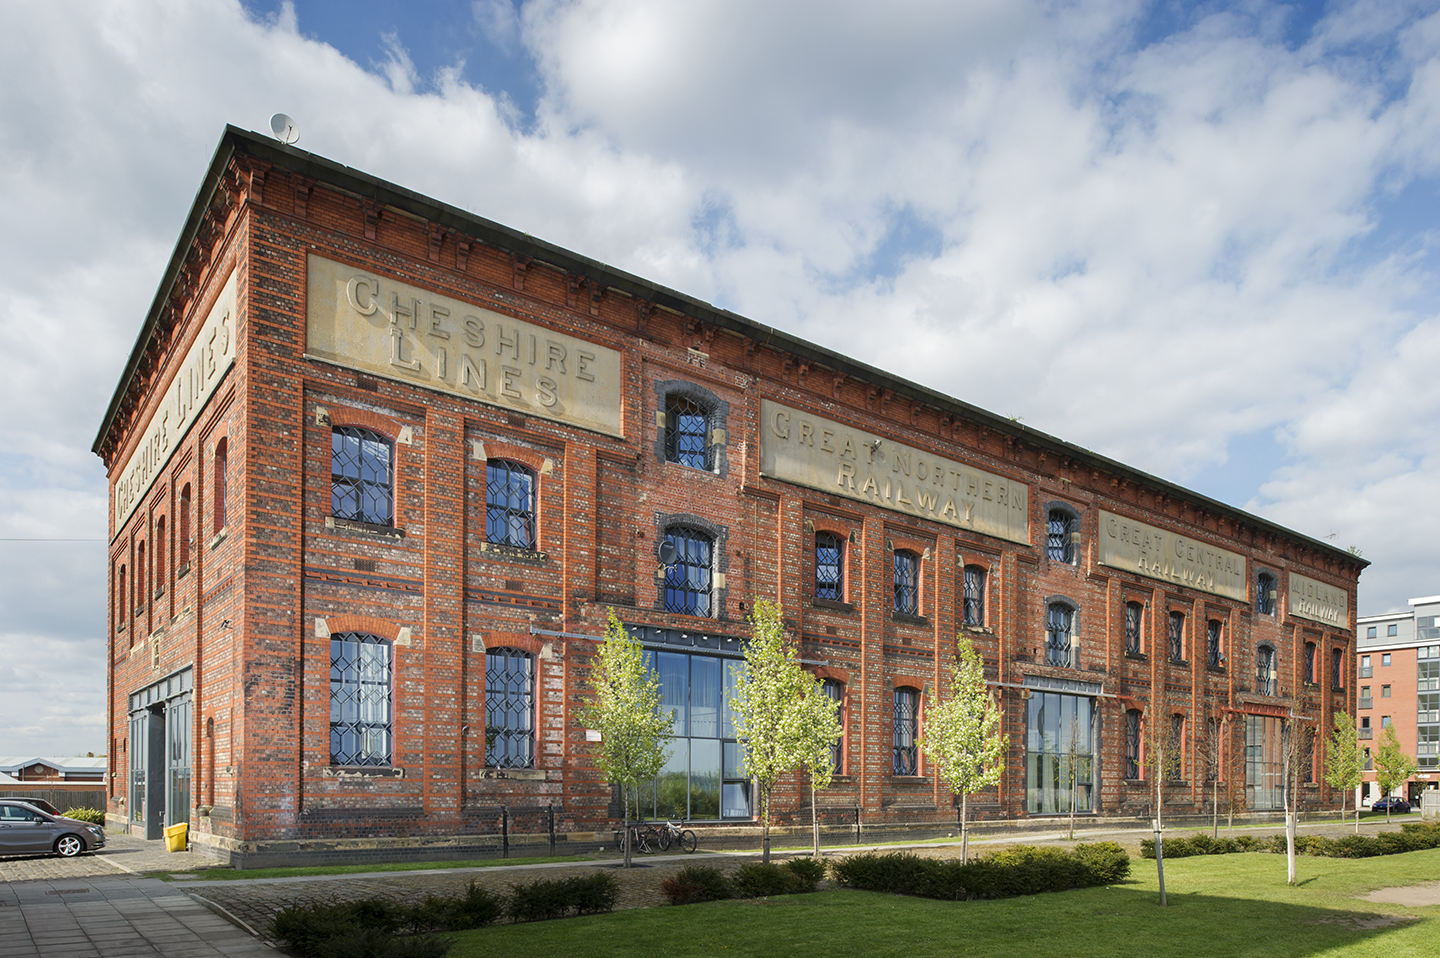 The Cheshire Lines Committee warehouse at Warrington (1897), made full use of the advertising possibilities offer on its façade to promote the three companies.